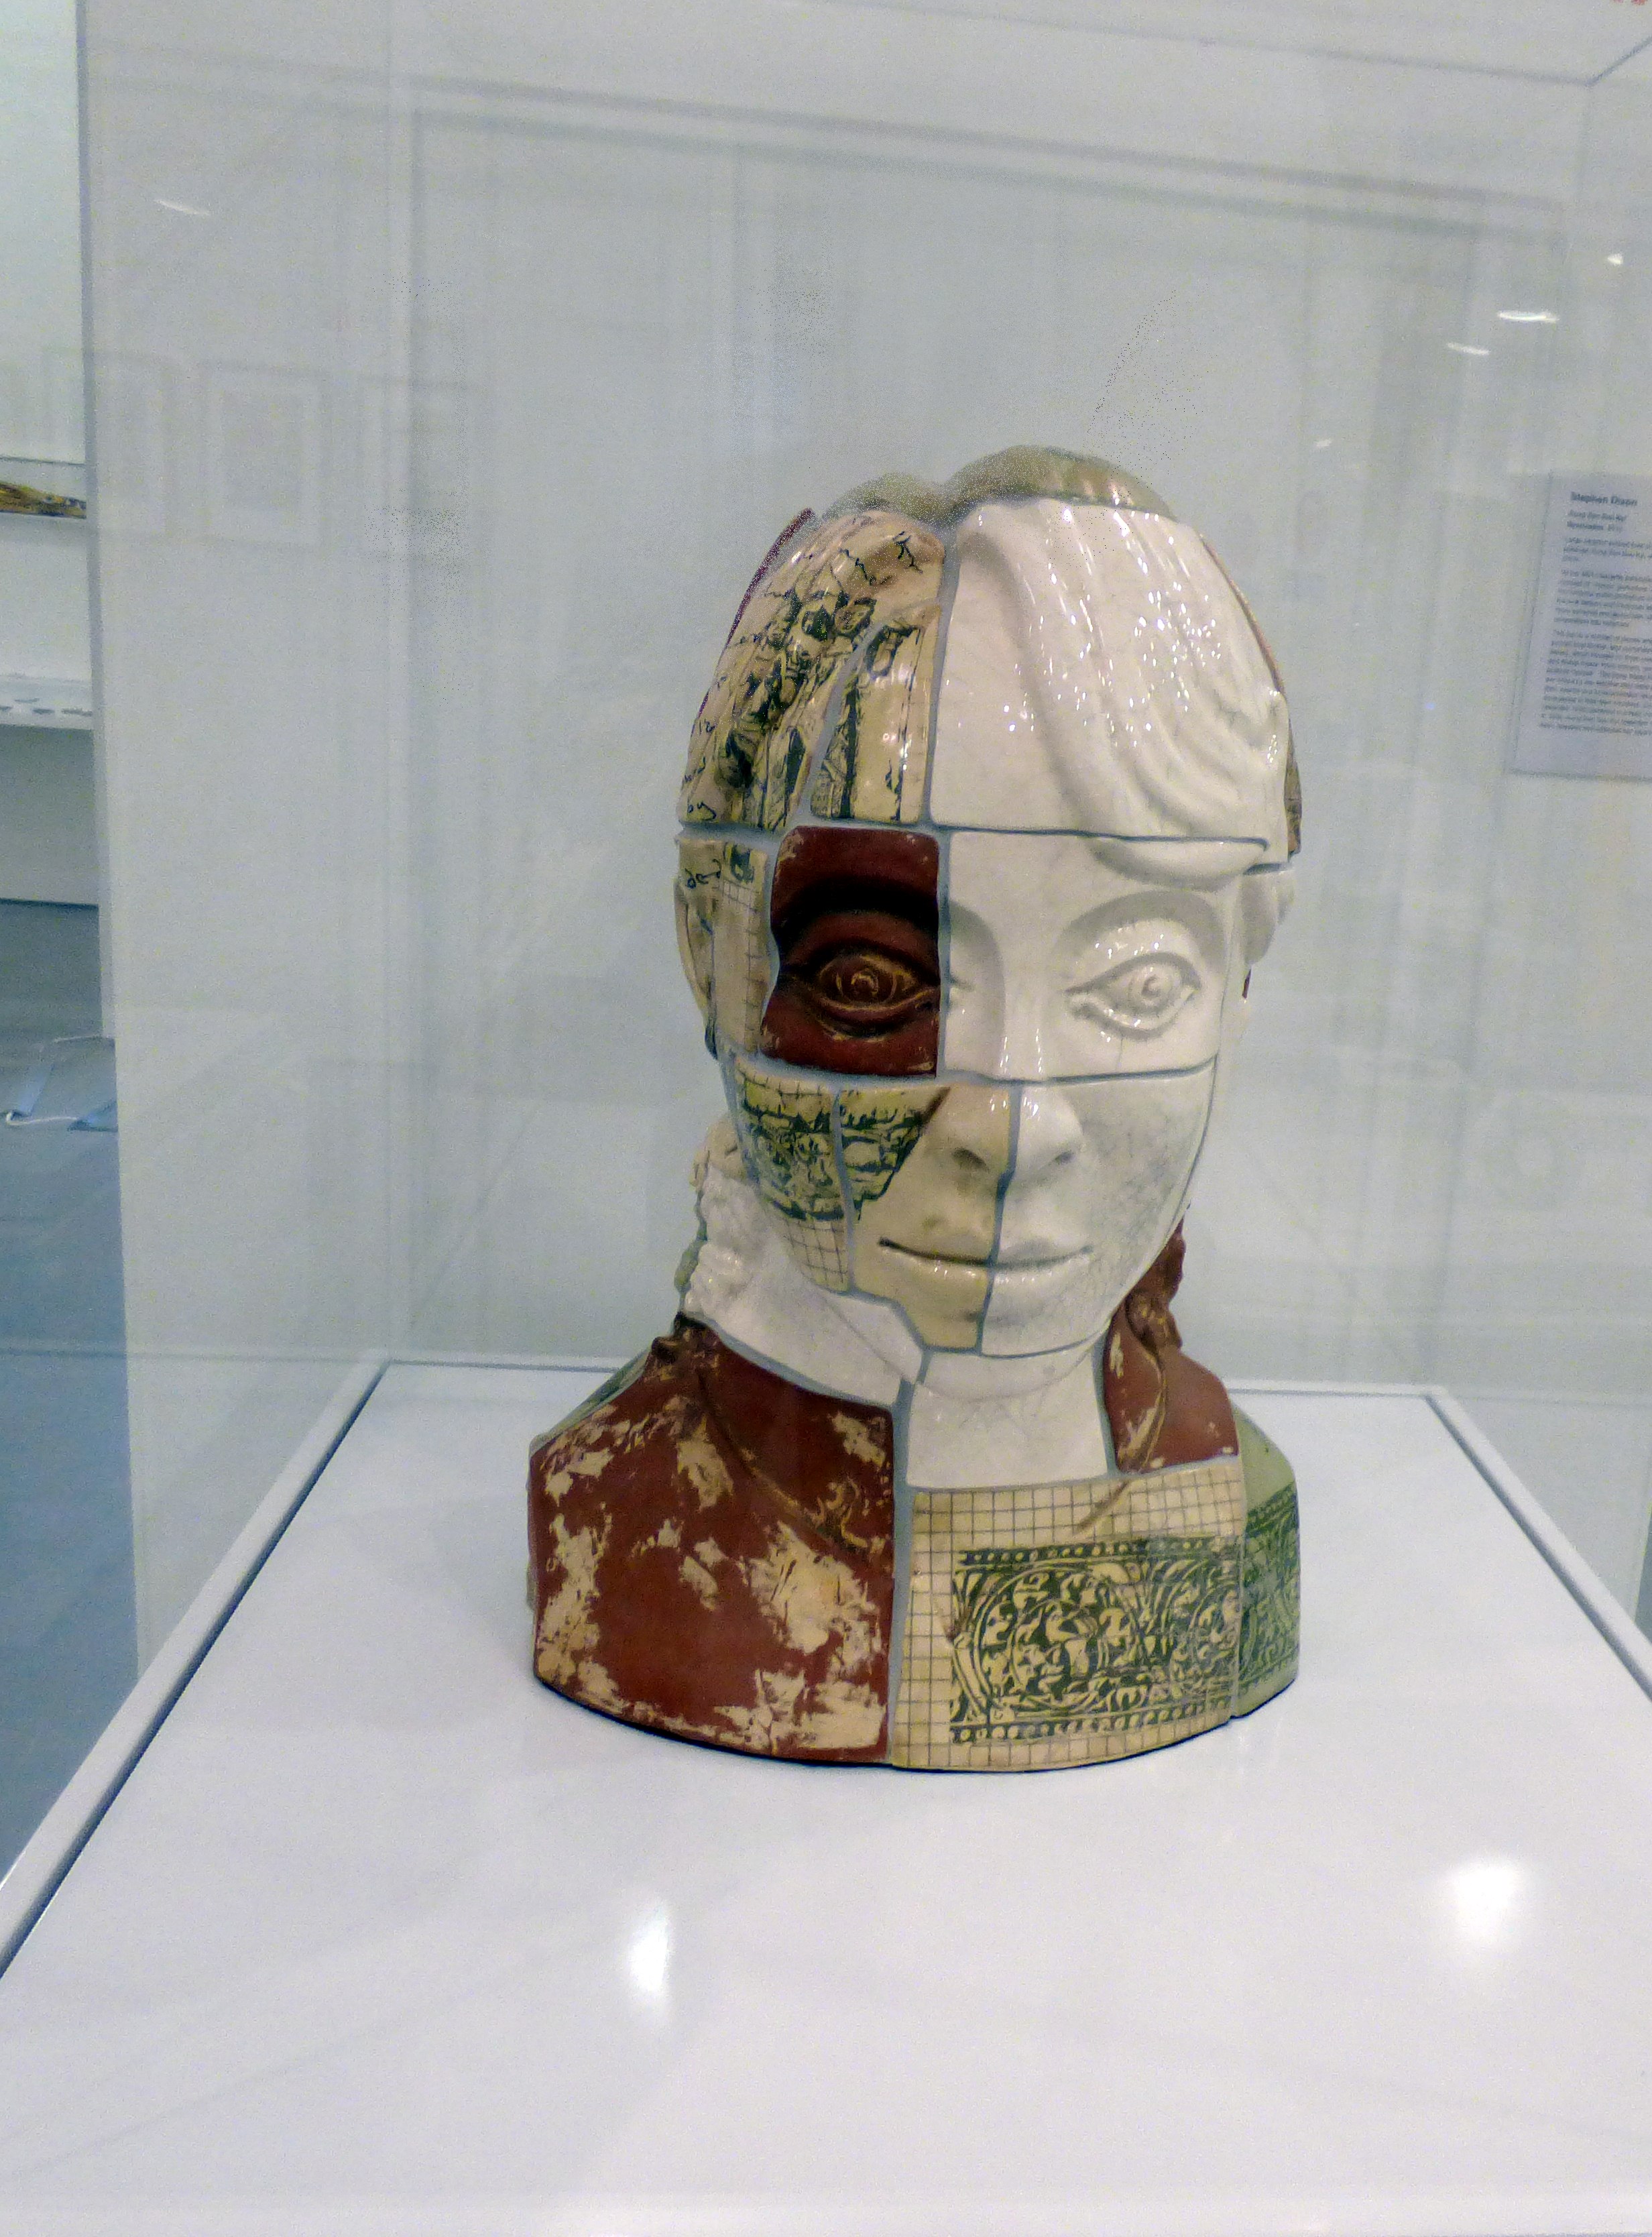 AUNG SAN SUU KYI RESTORATION by Stephen Dixon, 2012 ceramic, at CRAFTED exhibition, Kirkby Gallery, 2016